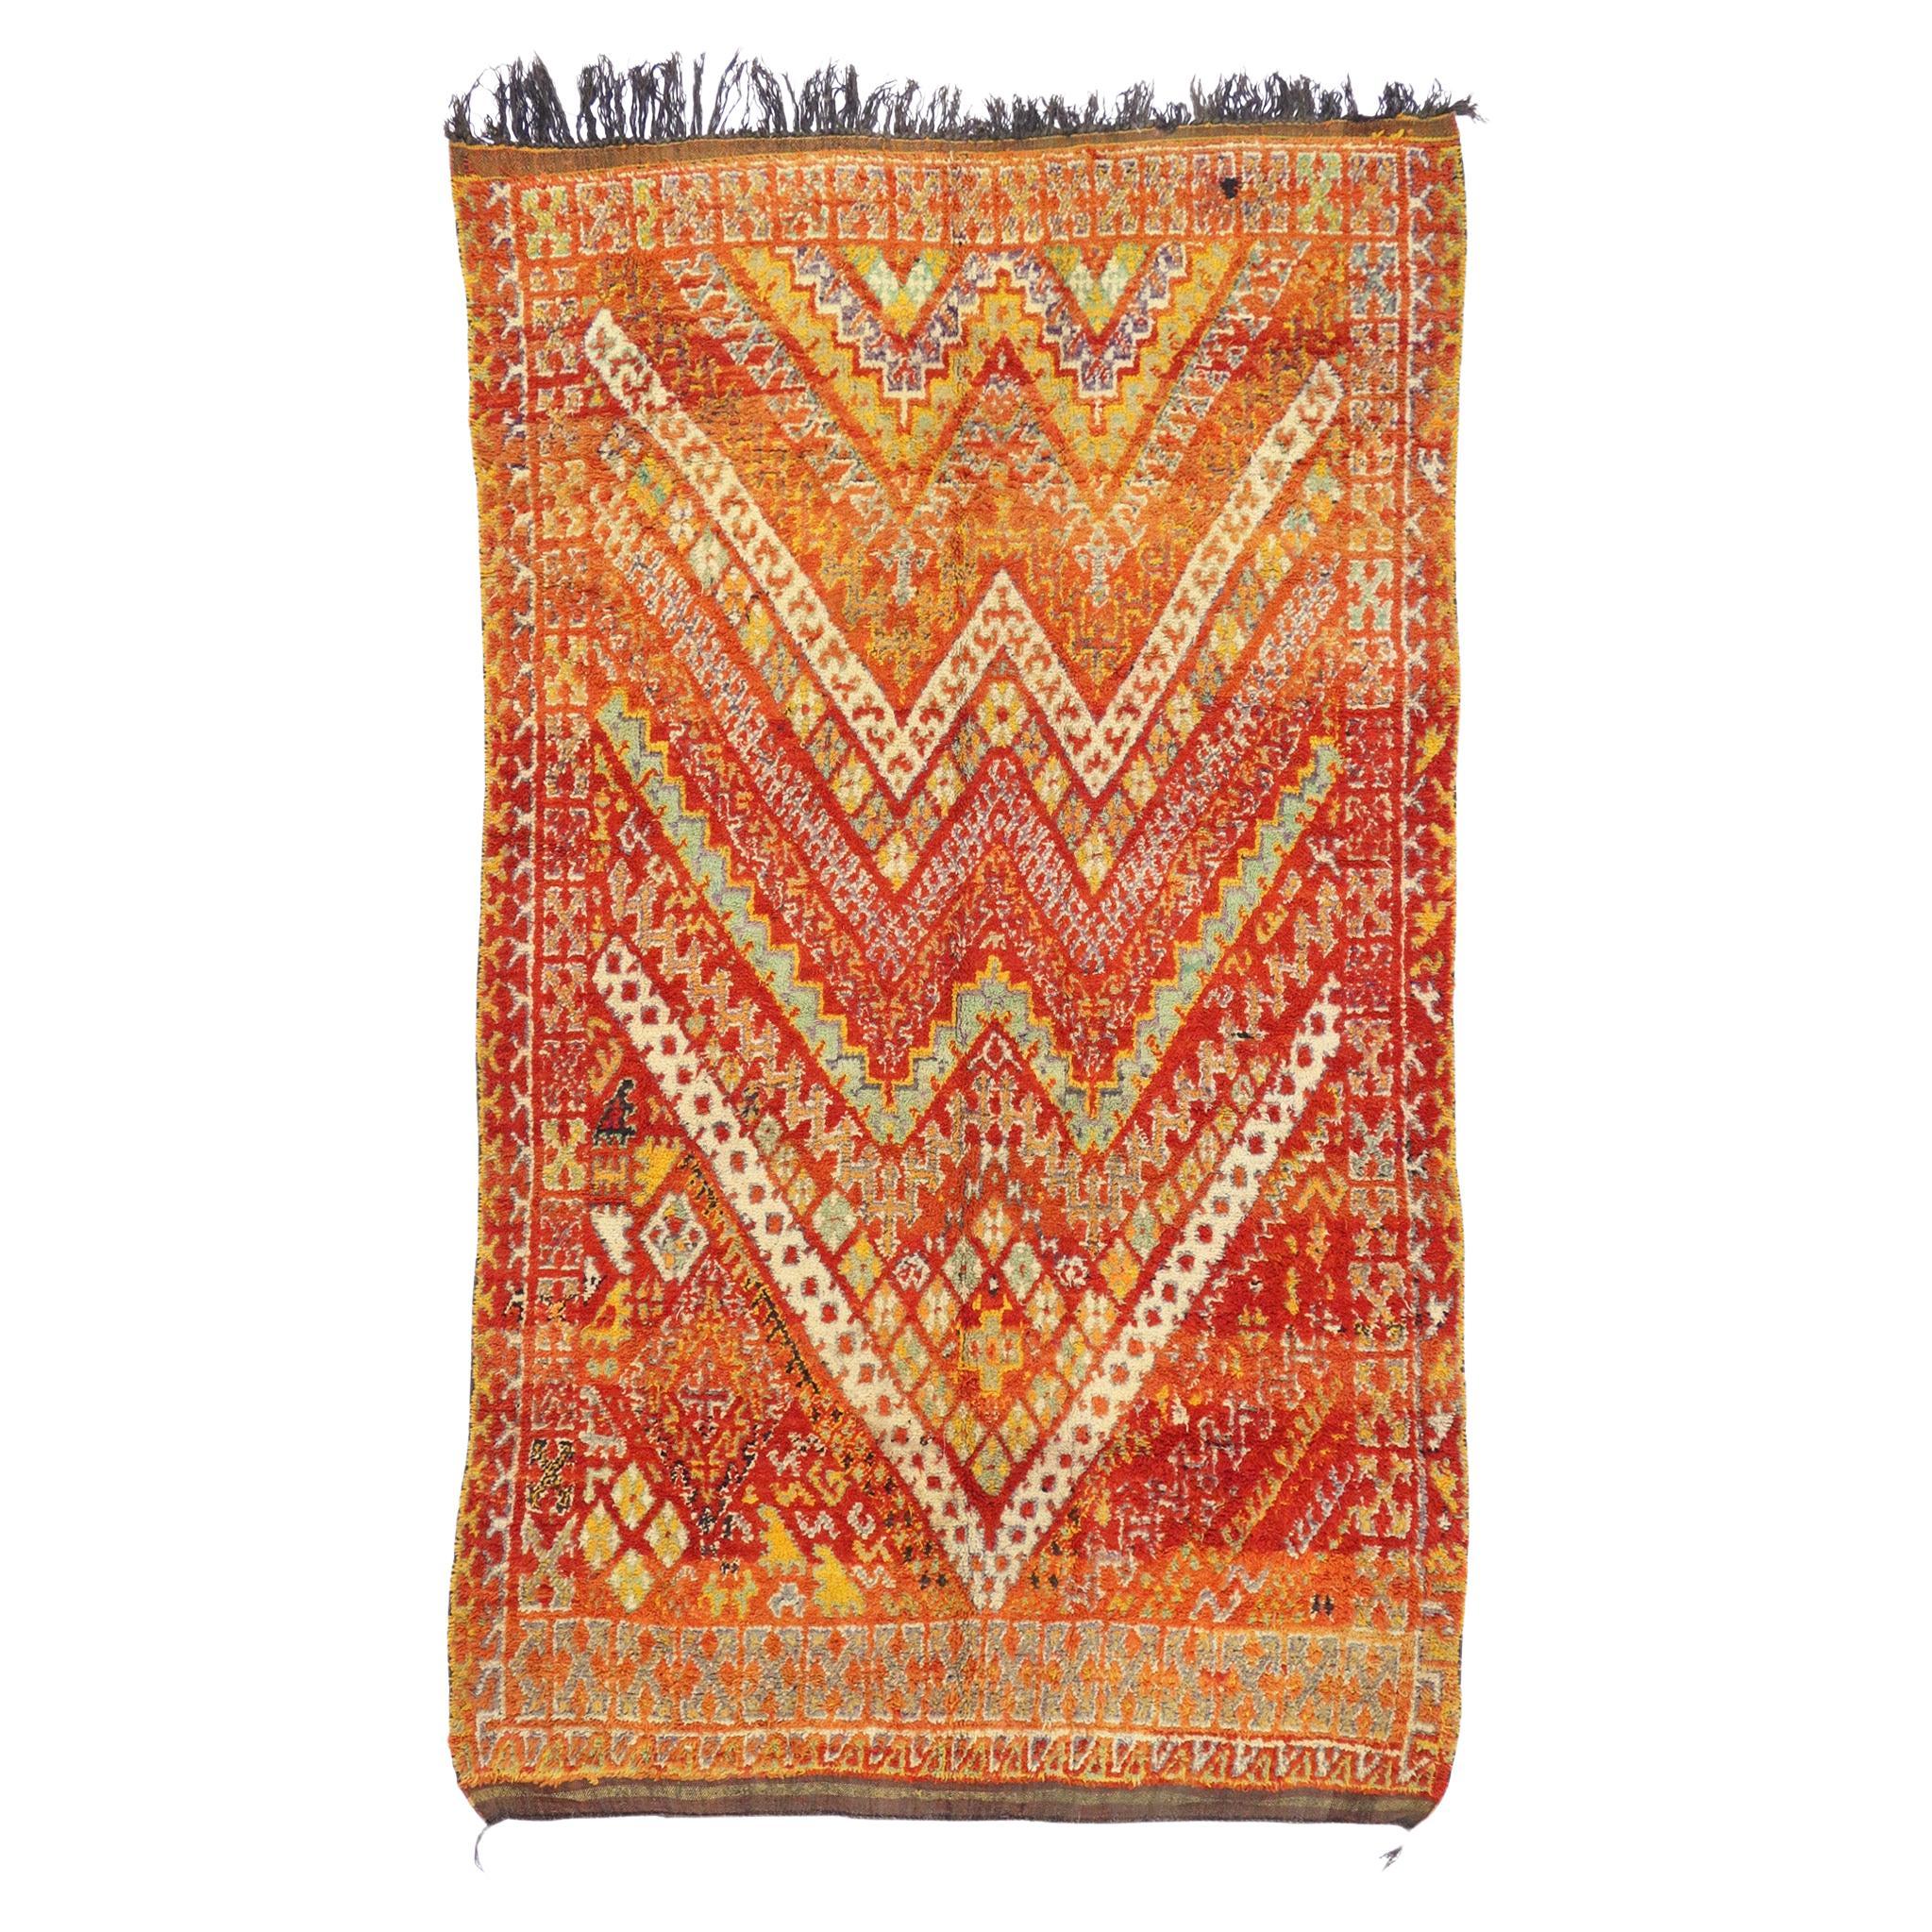 How are Beni Ourain rugs made?